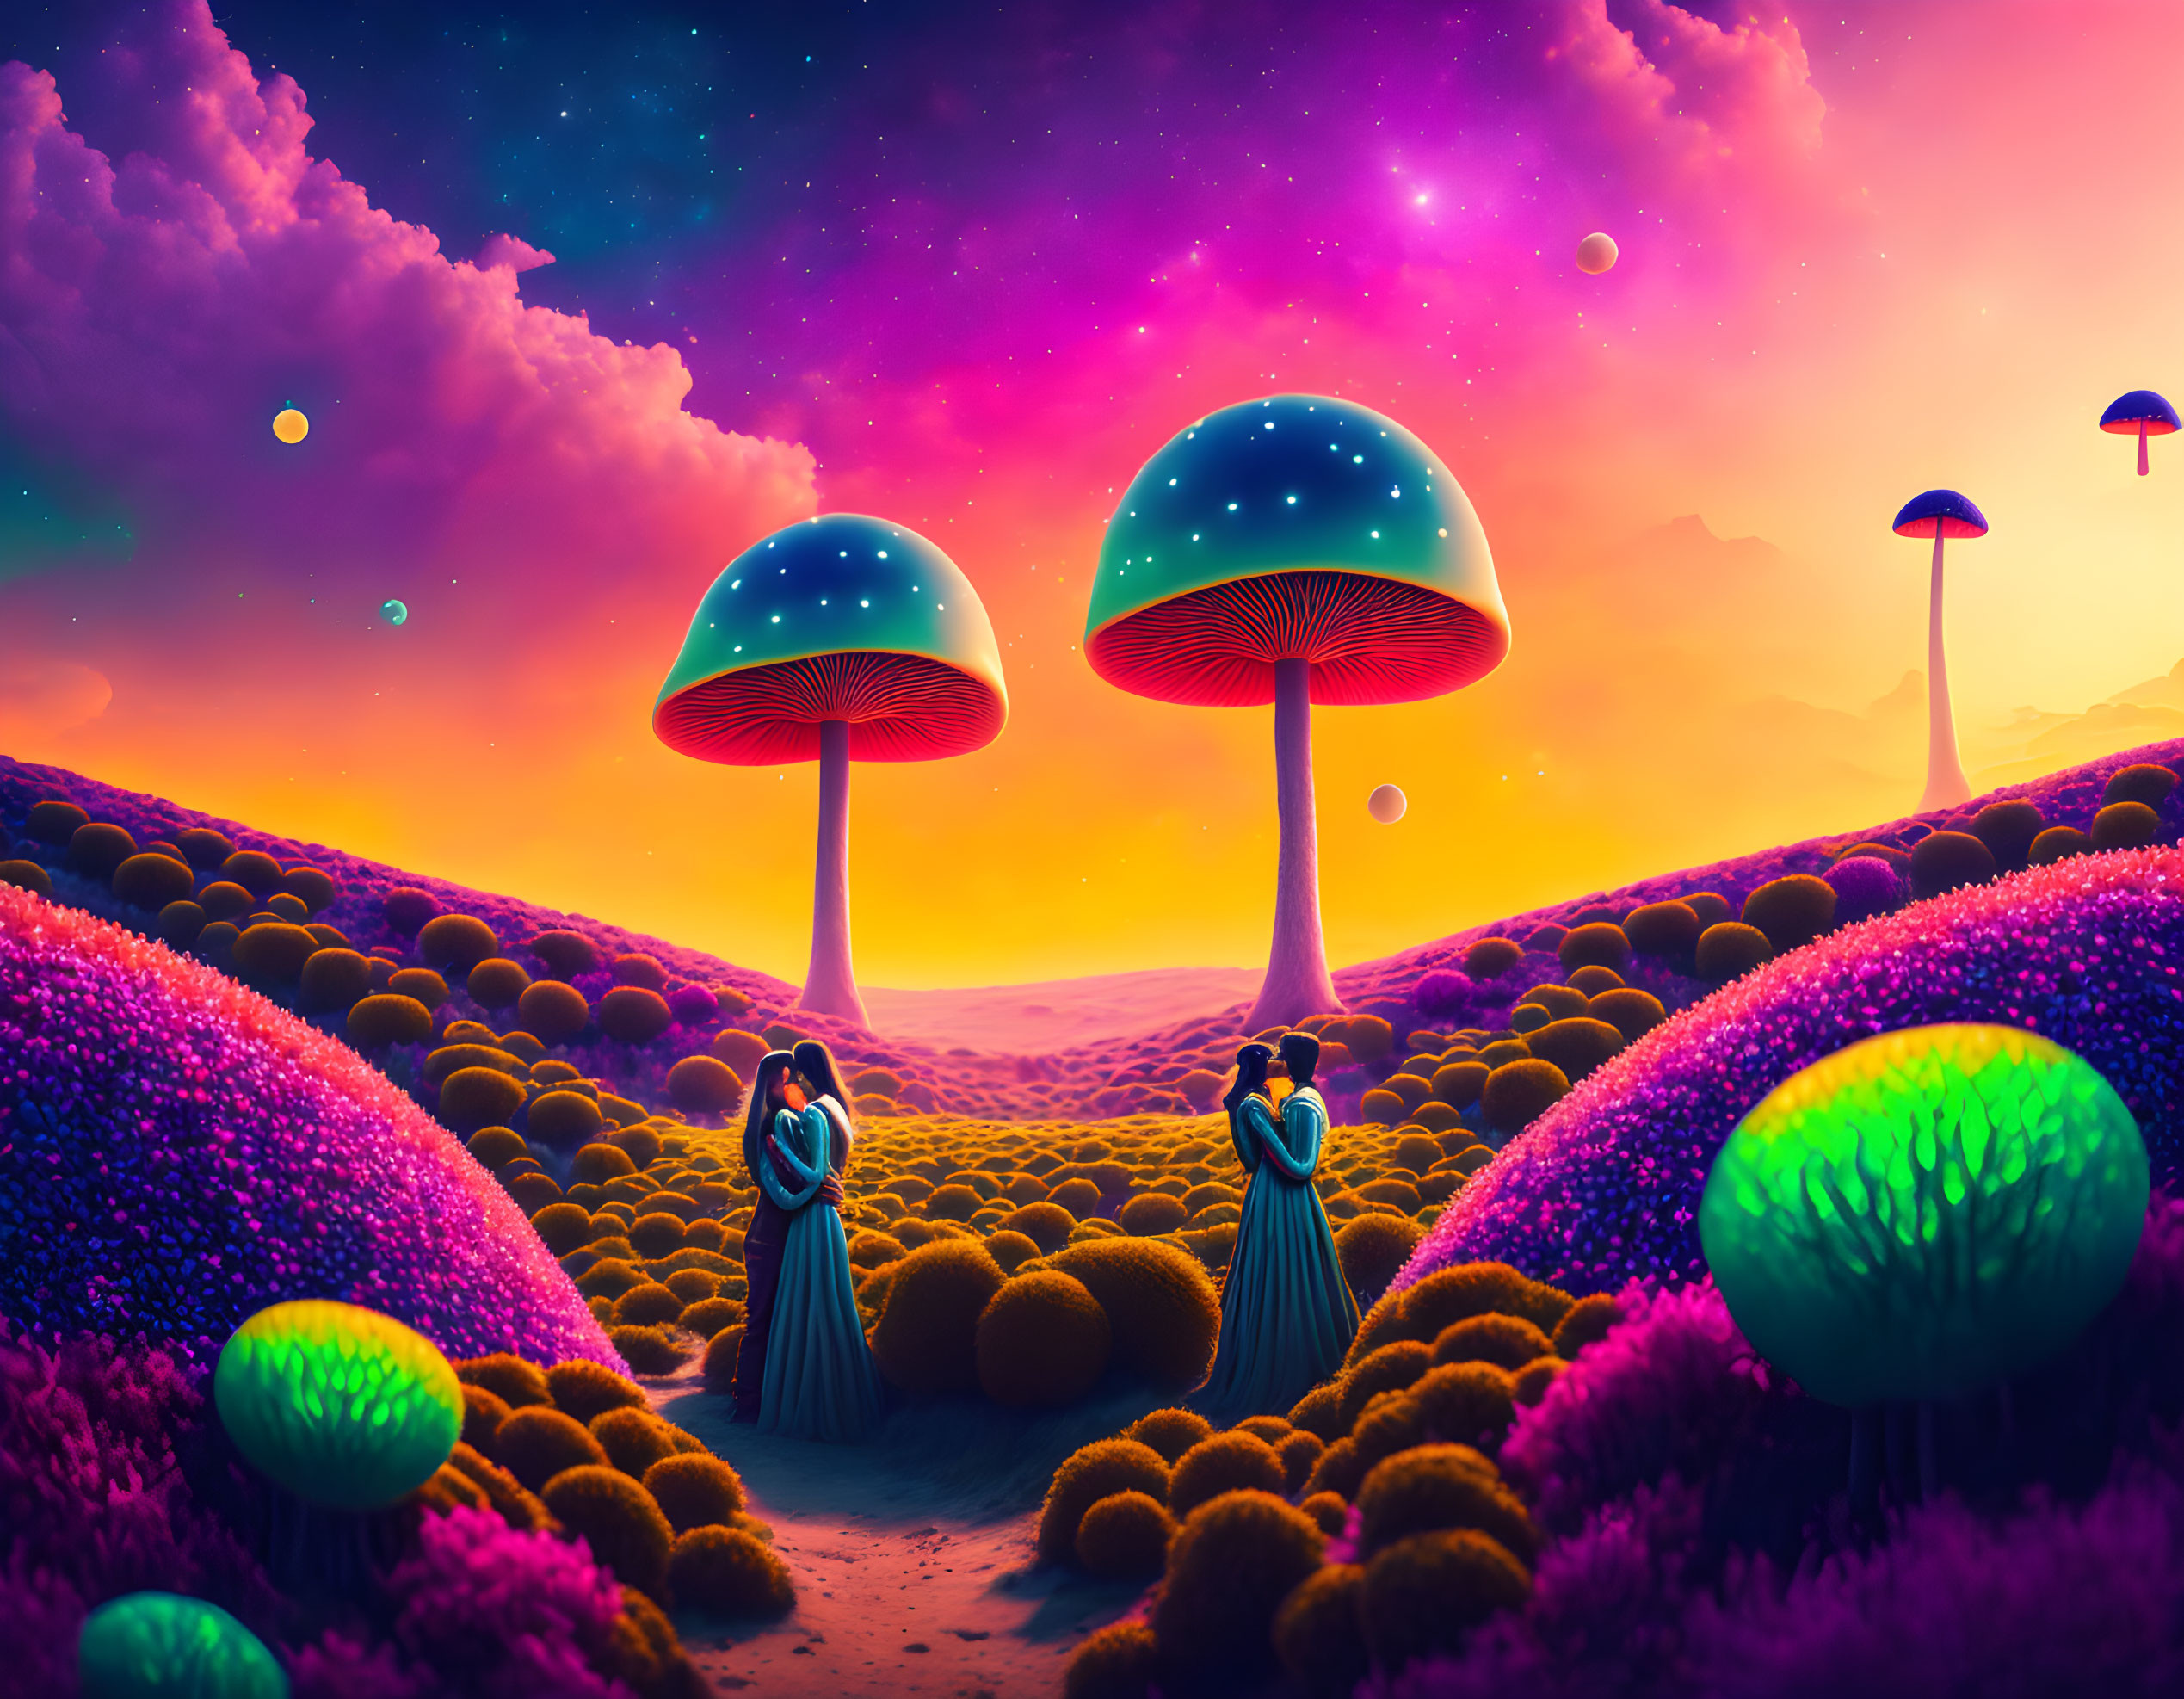 Lovers embracing in a mushroom field psychedelic 